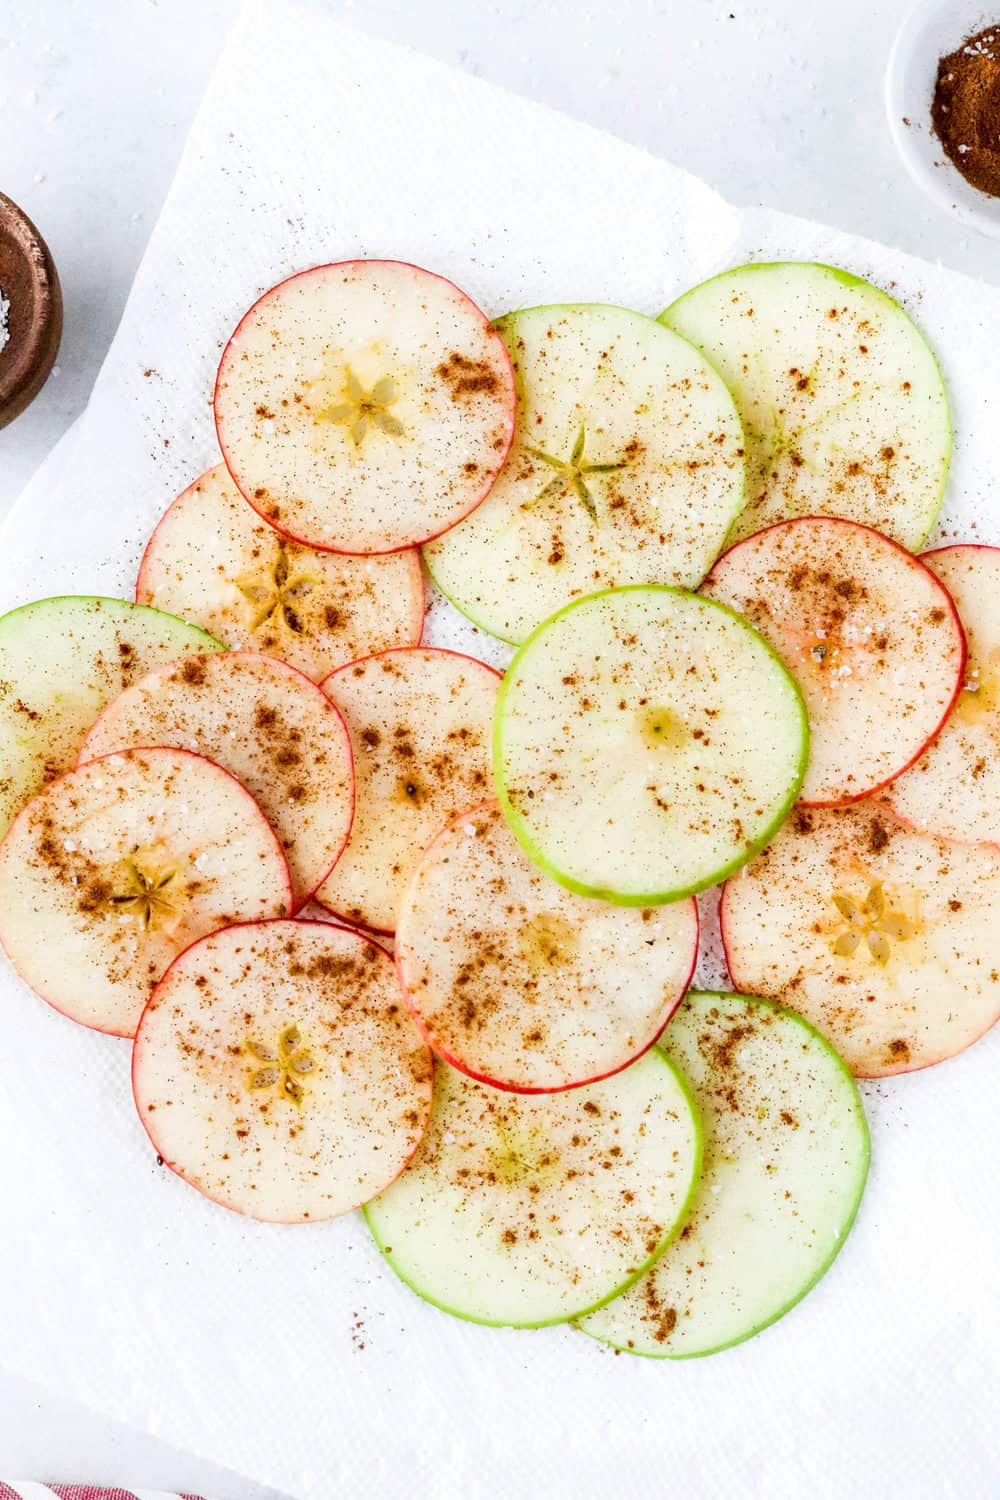 Pile of sliced apples on a white plate sprinkled with cinnamon with a small bowl of cinnamon behind it